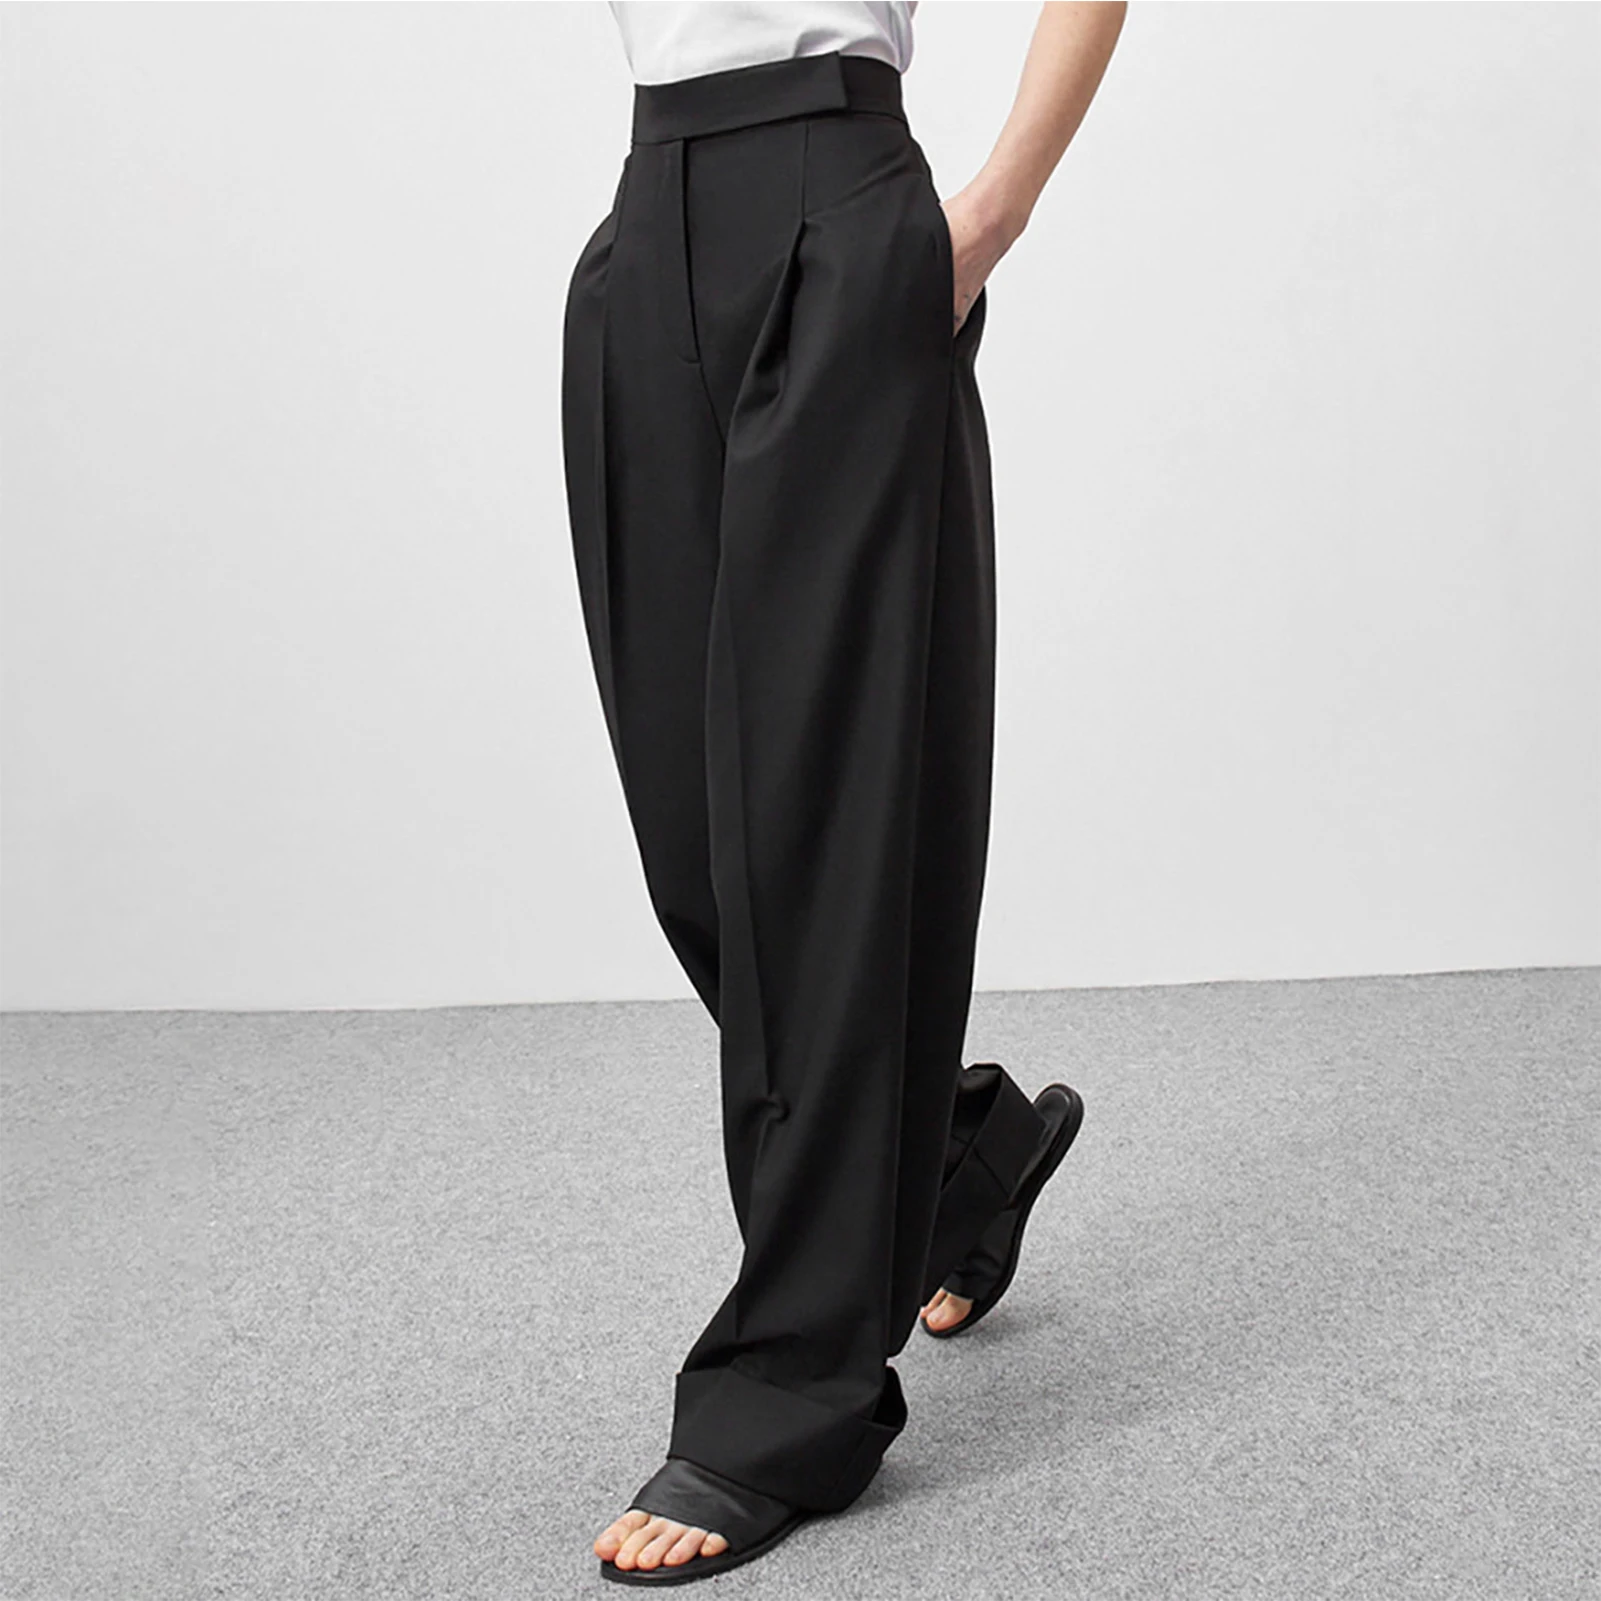 Spring Summer Black Ladies Office Trousers Women High Waist Pants Pockets Female Solid Pleated Casual Wide Leg Pants Suit 2023